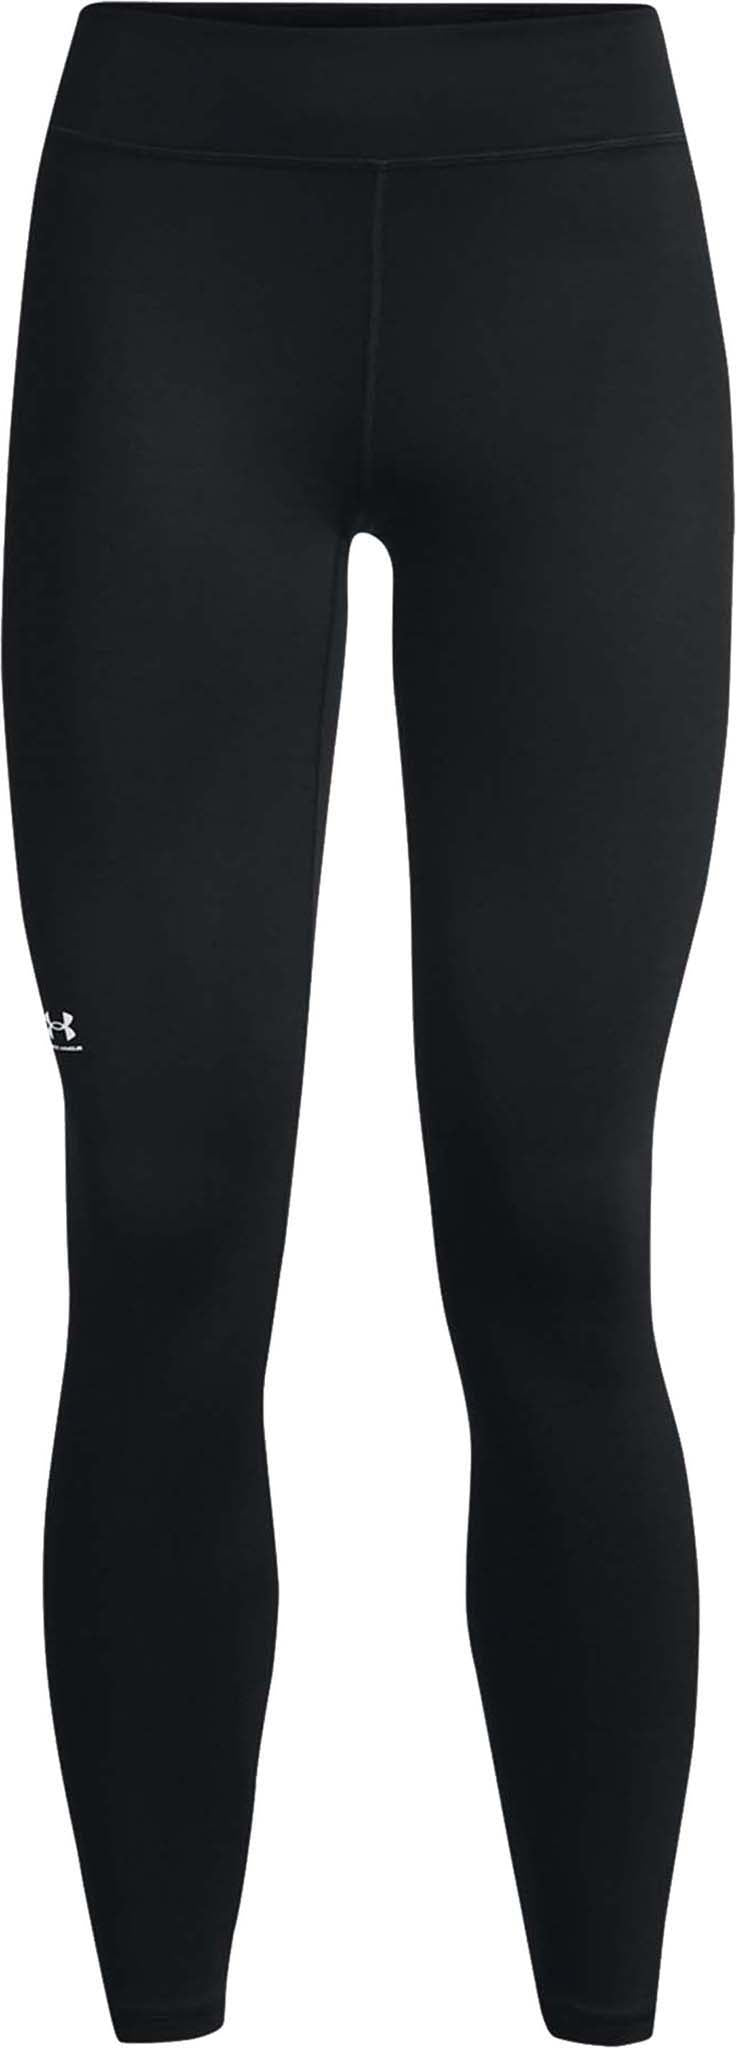 Under Armour ColdGear Tights Womens Running Pants - Pants - Running  Clothing - Running - All